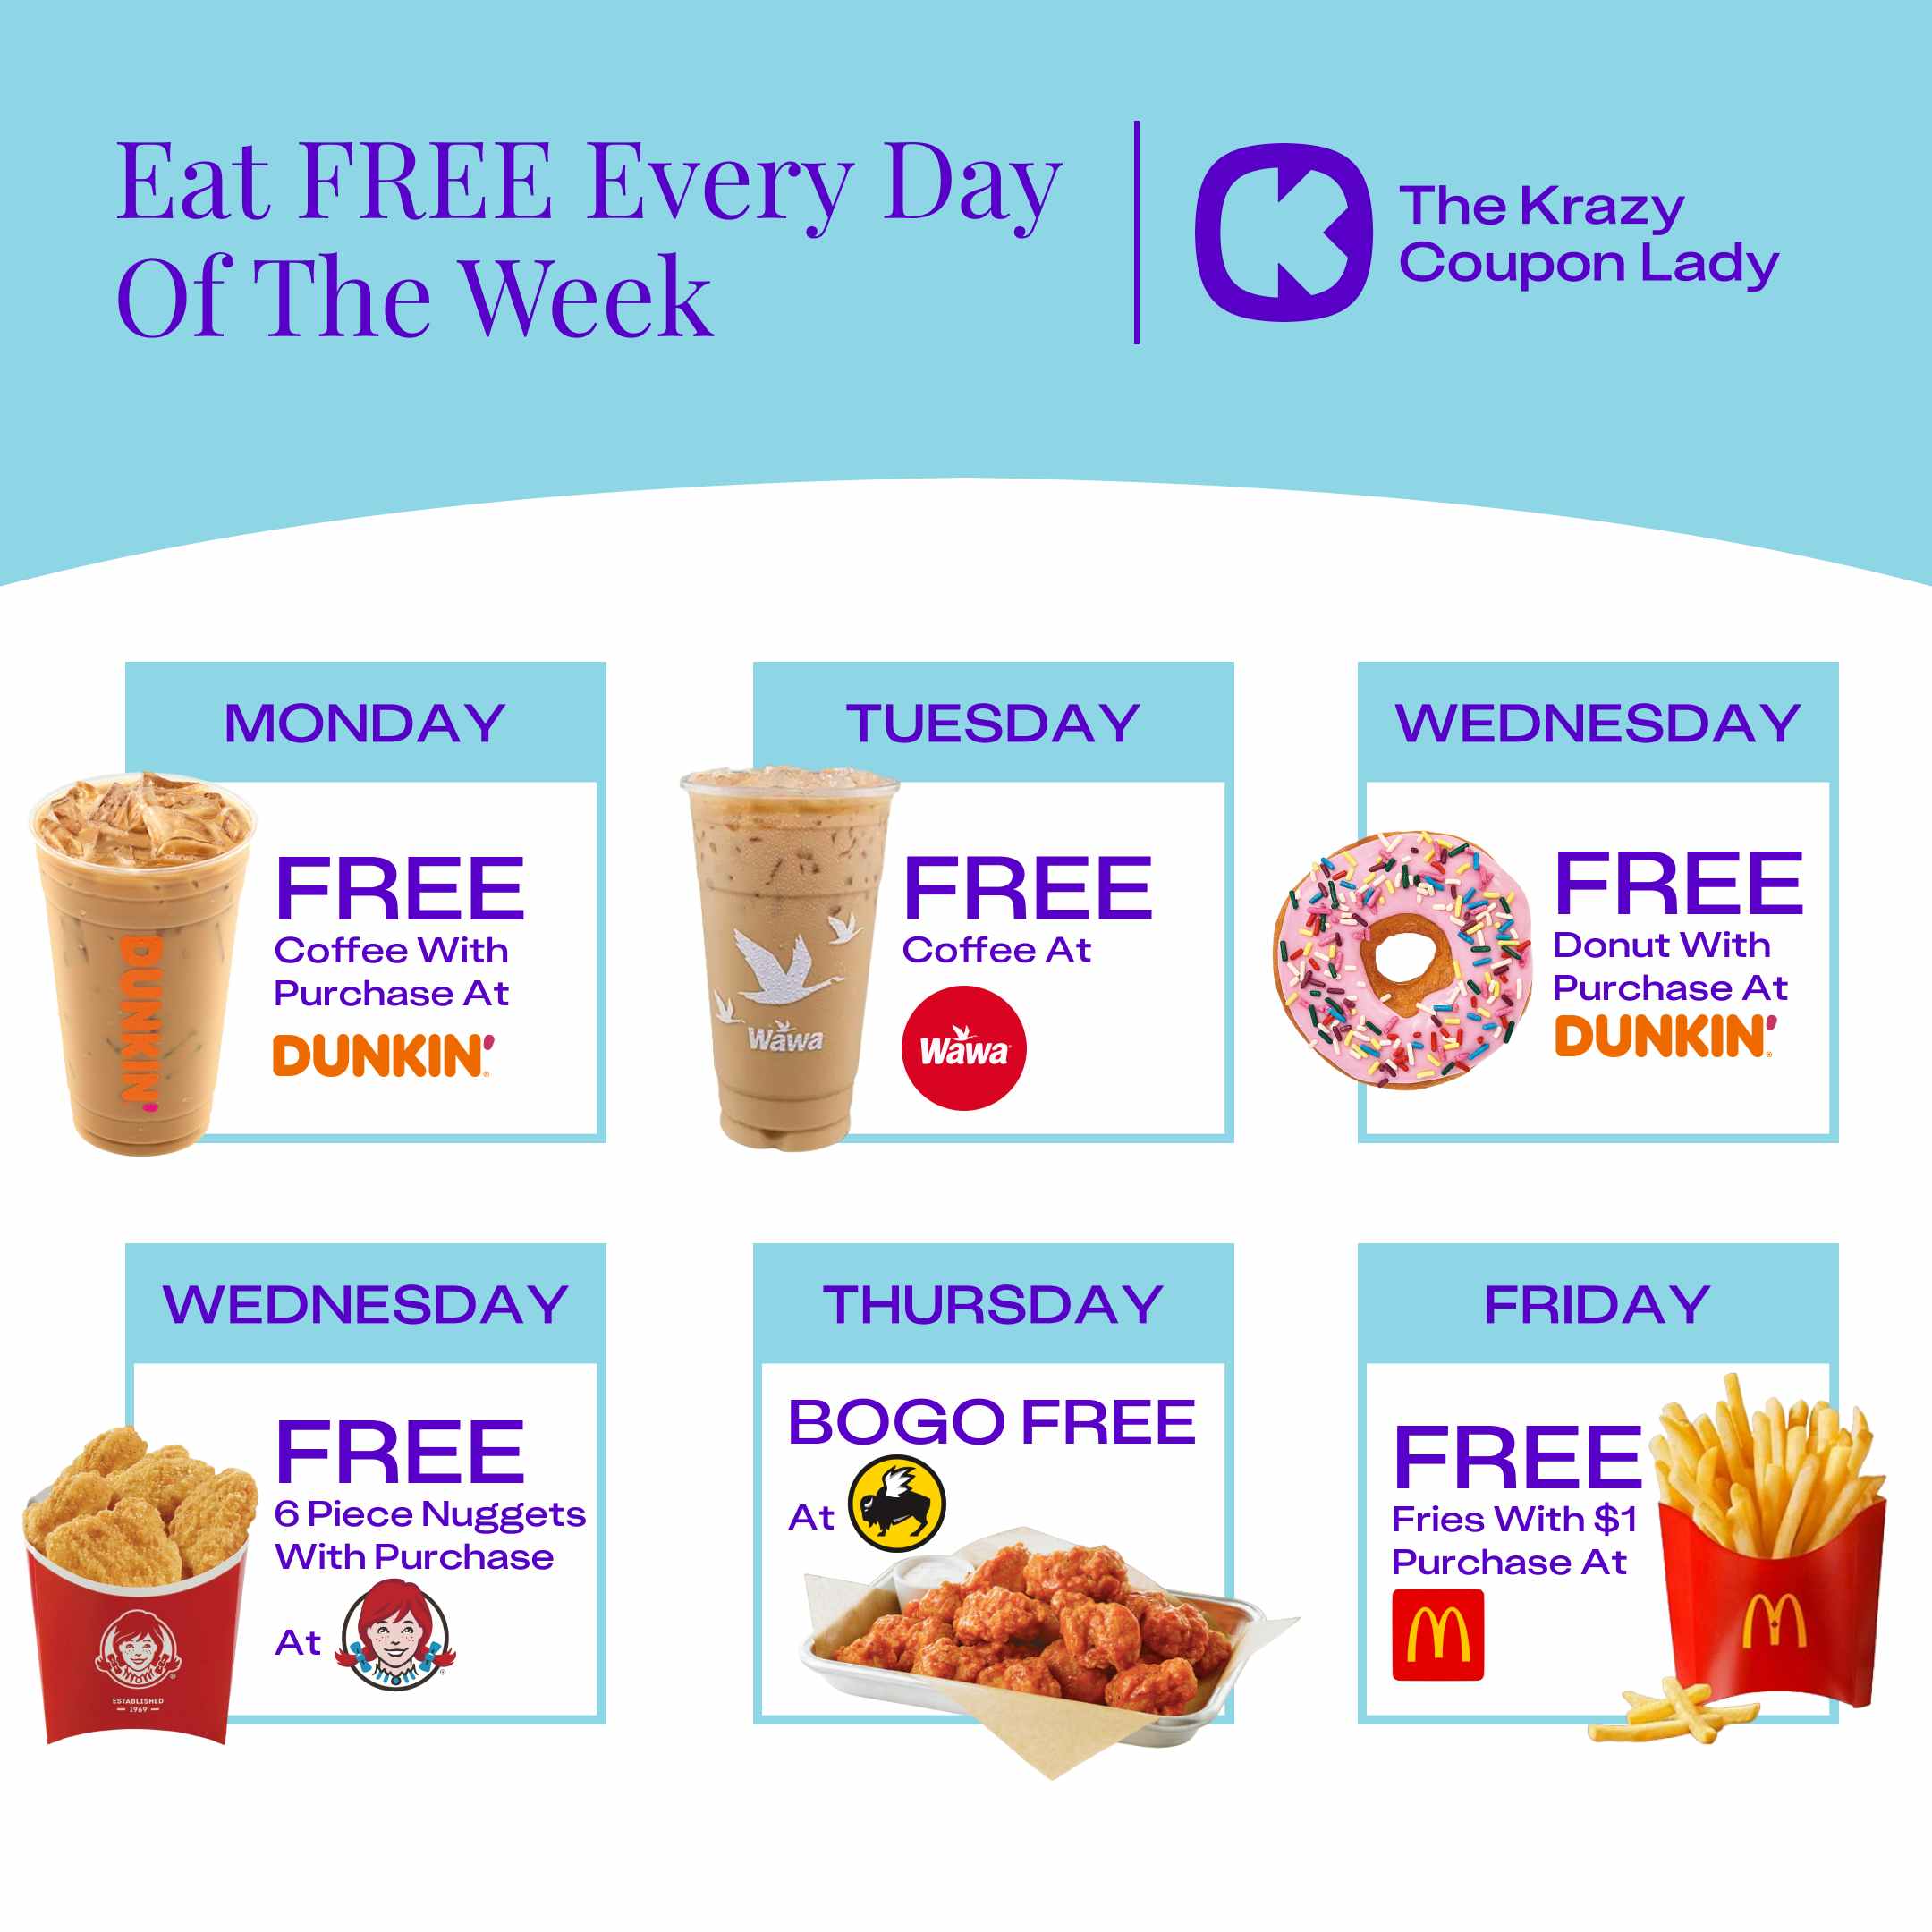 Wednesday Food Deals: Free Dunkin Donut and Free 6 Piece Nuggets